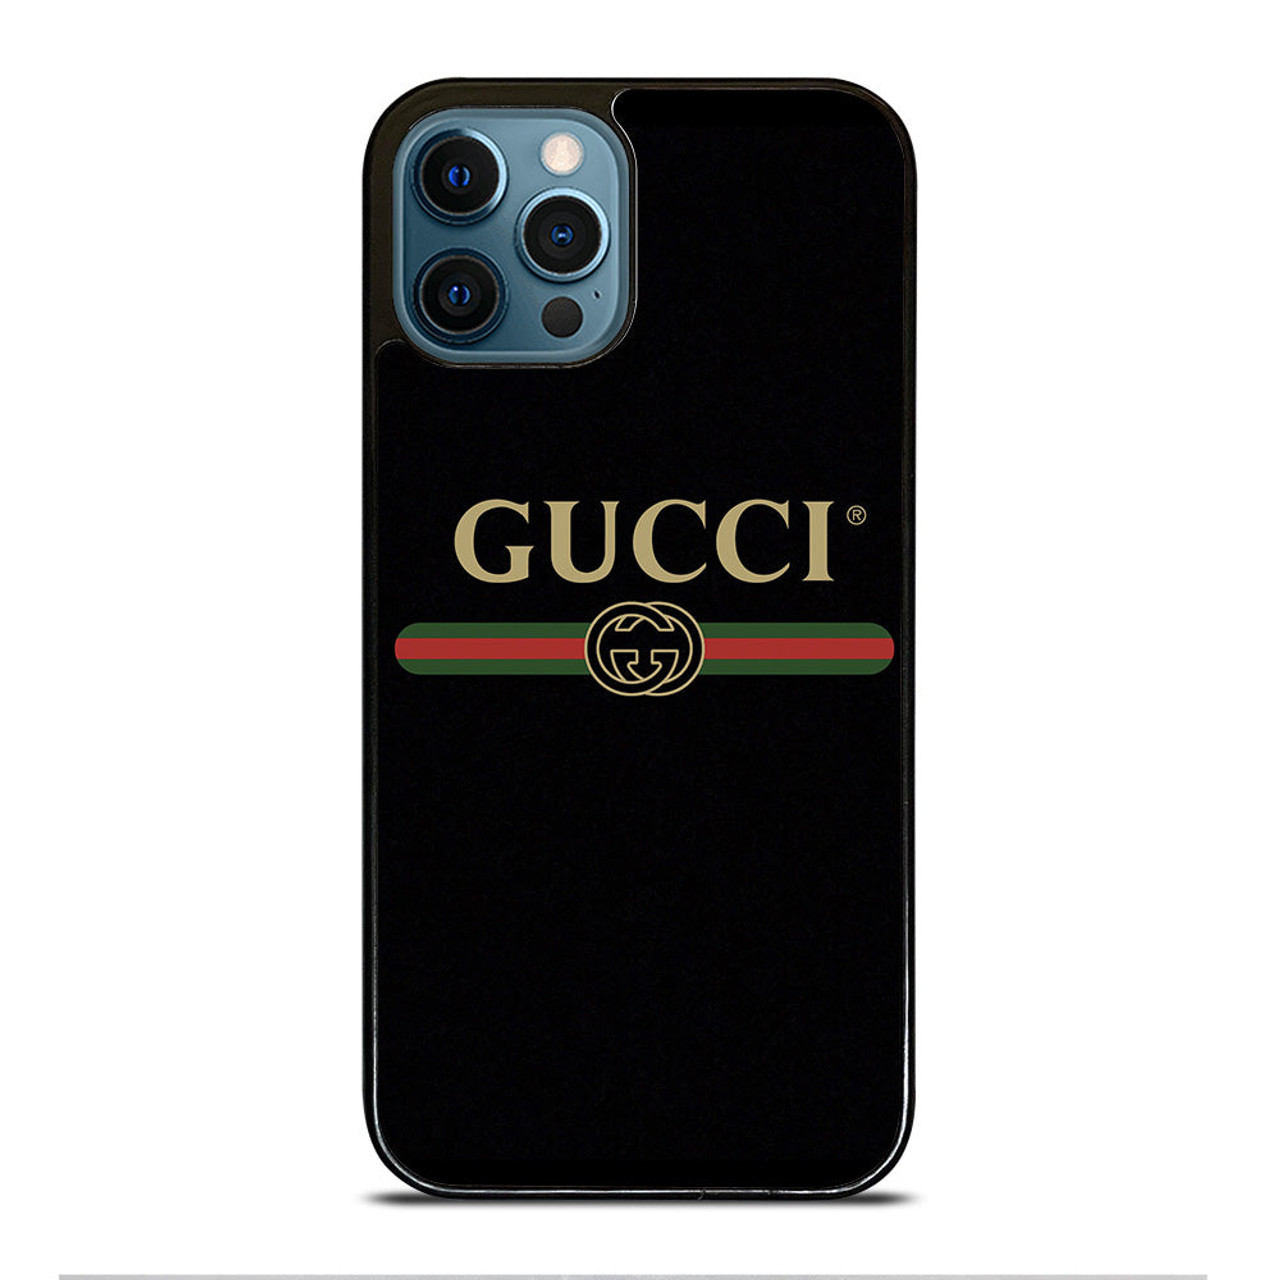 New Auth GUCCI iPhone Case Guccy Logo Phone #519696 Moon/Star